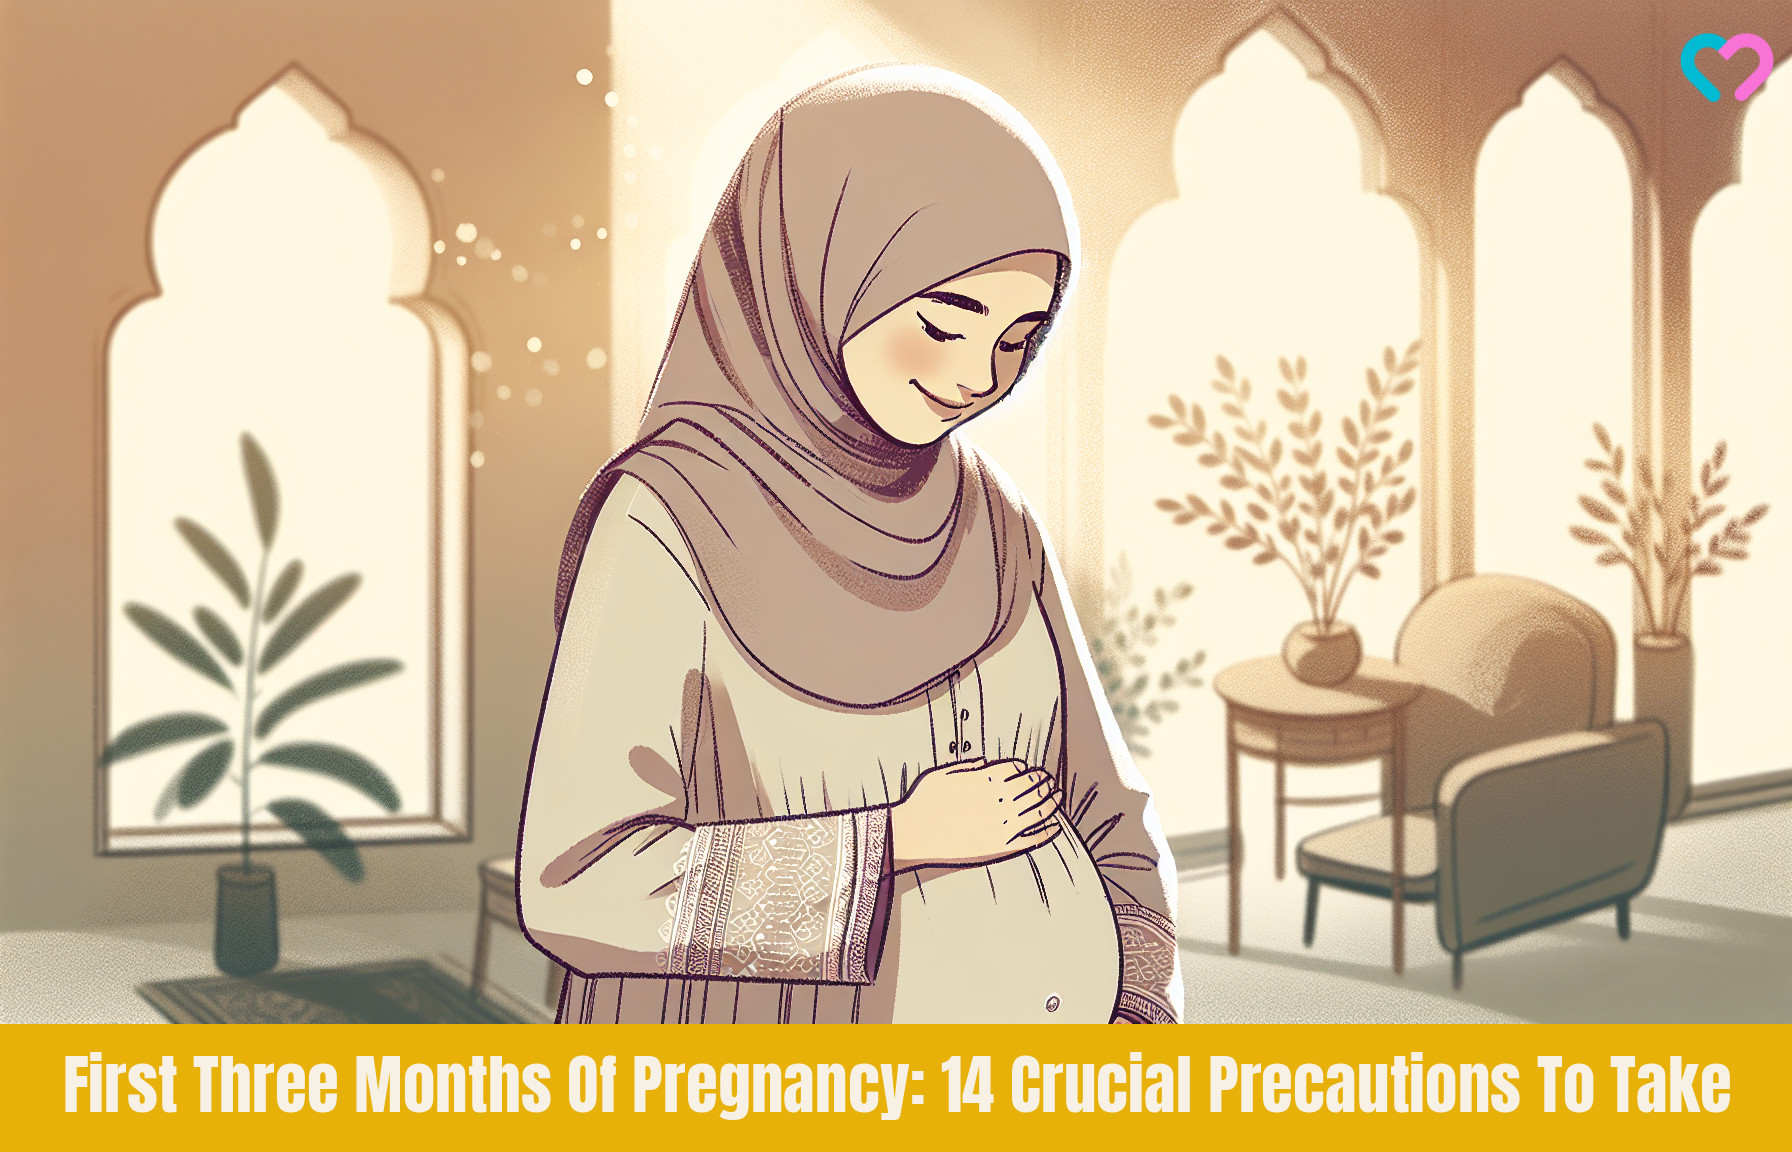 First Three Months Of Pregnancy: 14 Crucial Precautions To Take